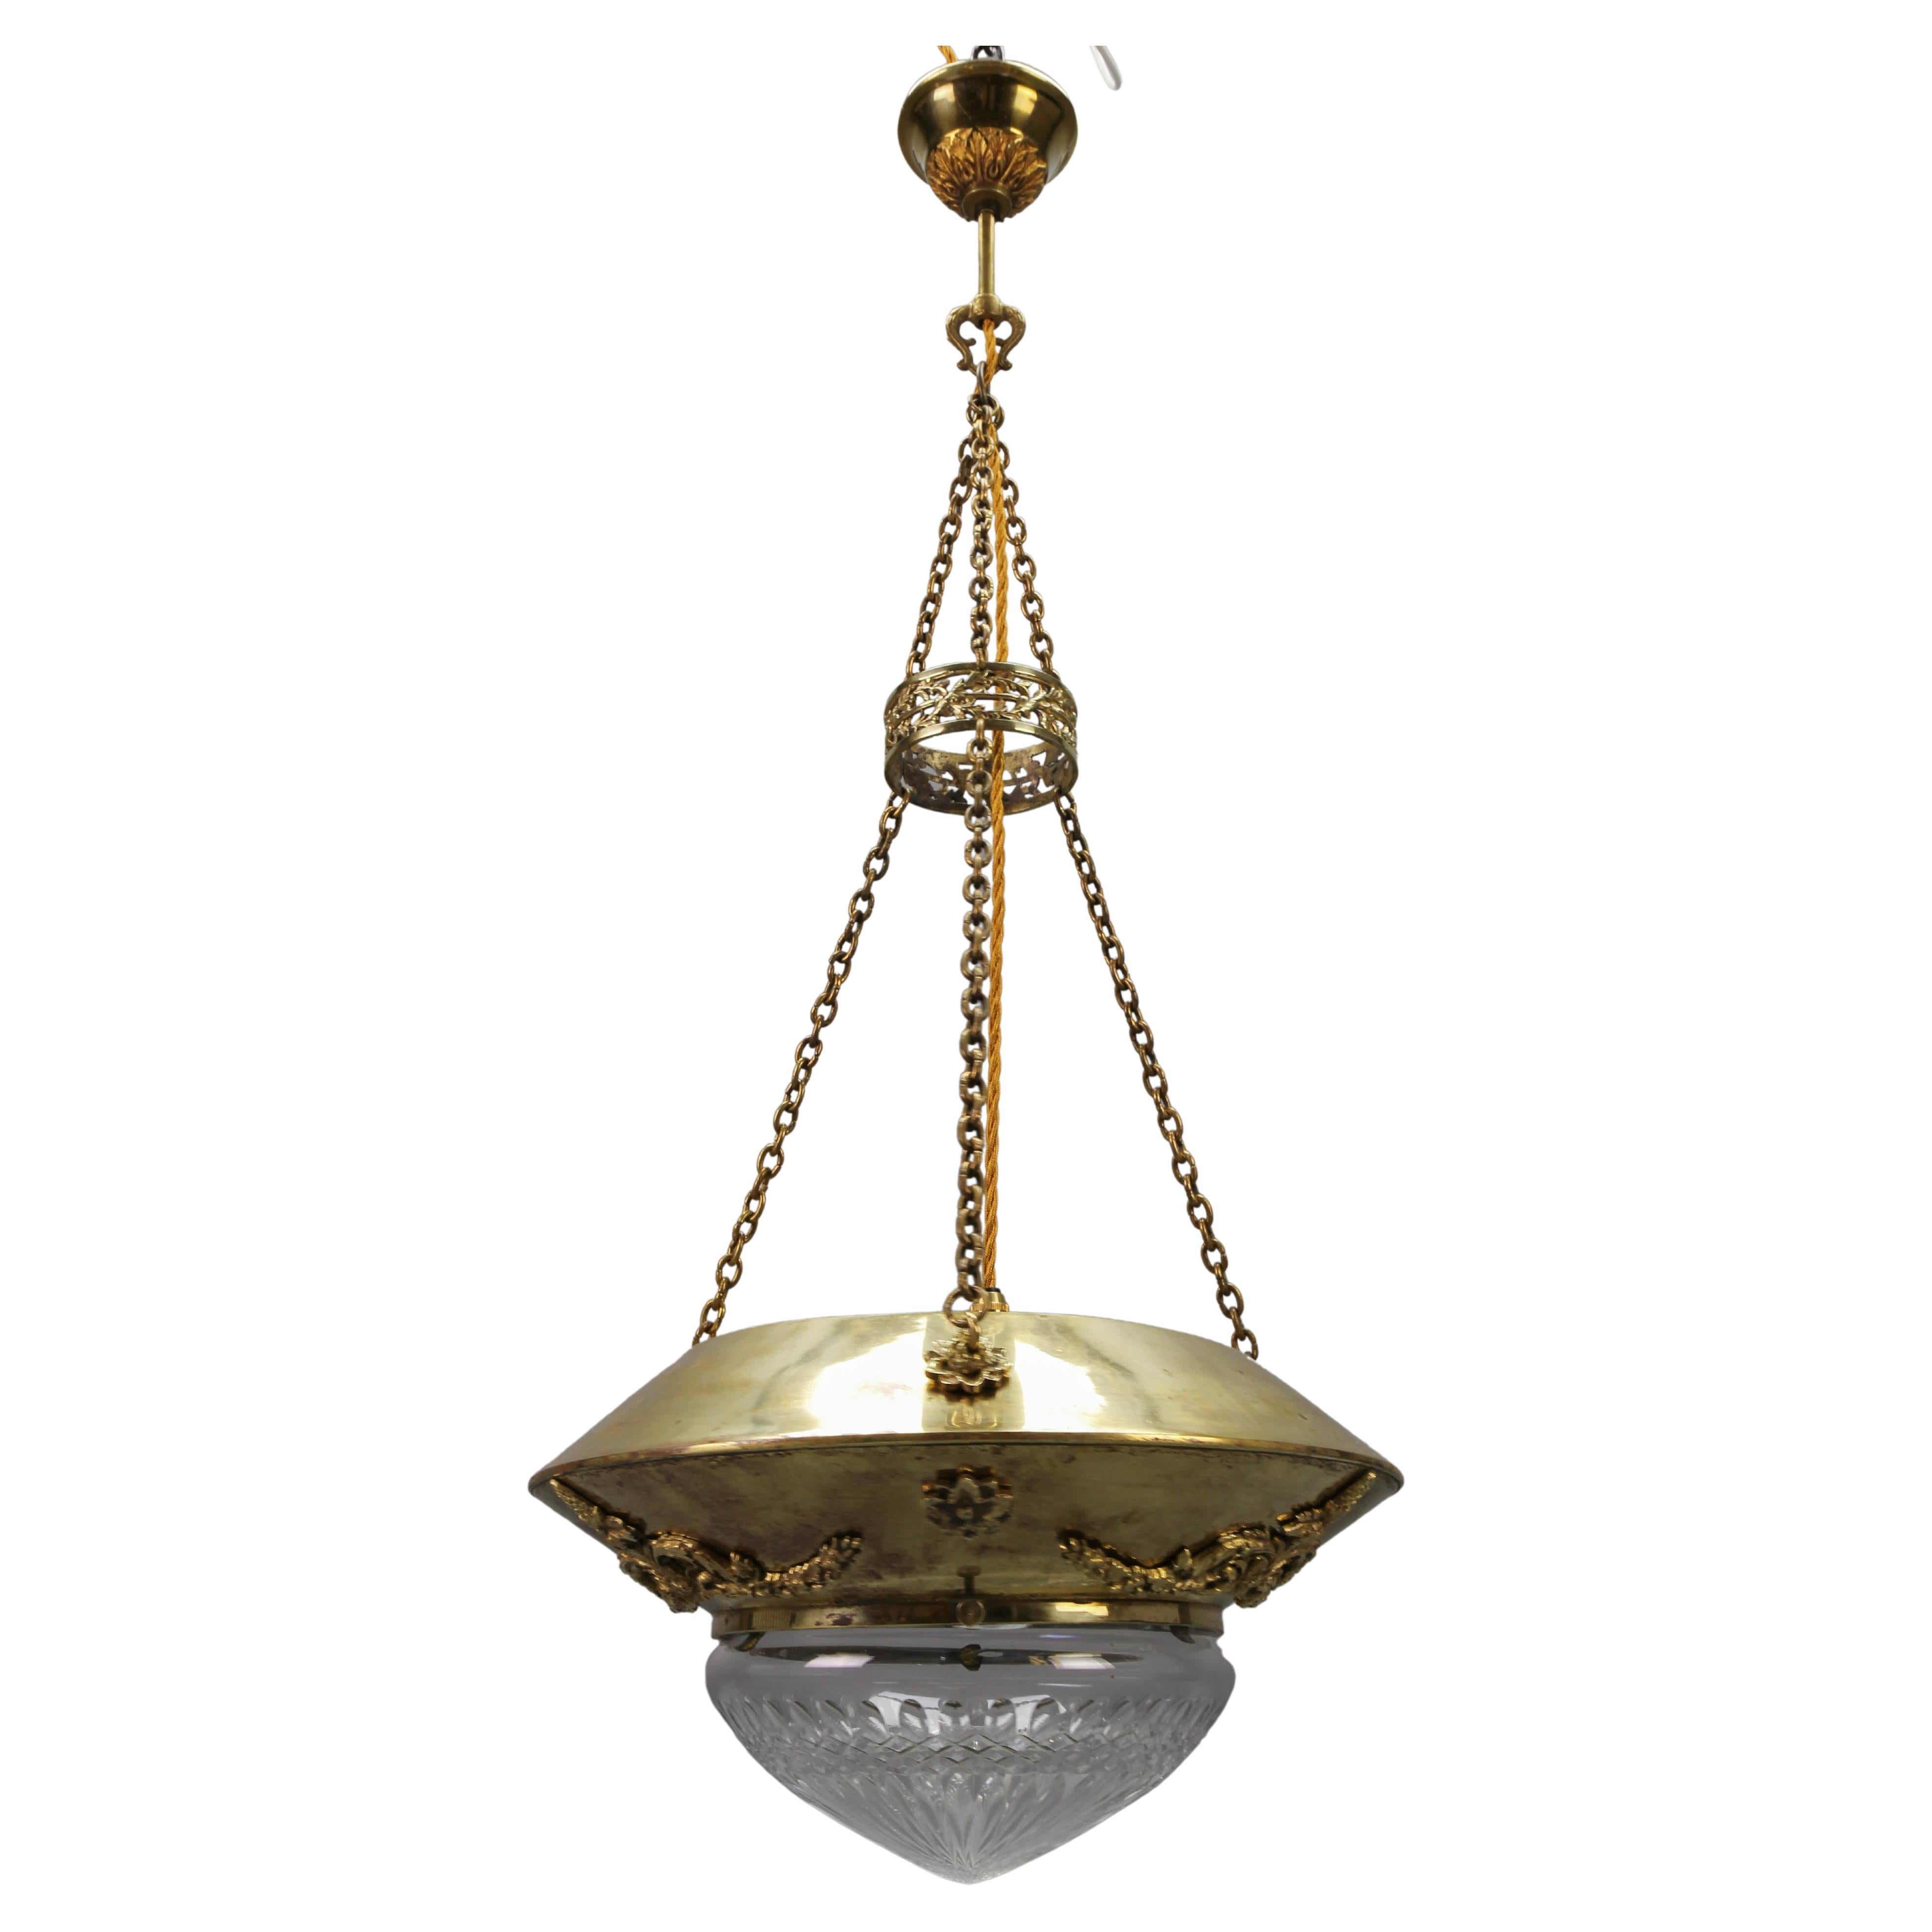 Antique French Brass and Bronze Pendant Light with Cut Glass Lampshade, ca. 1900